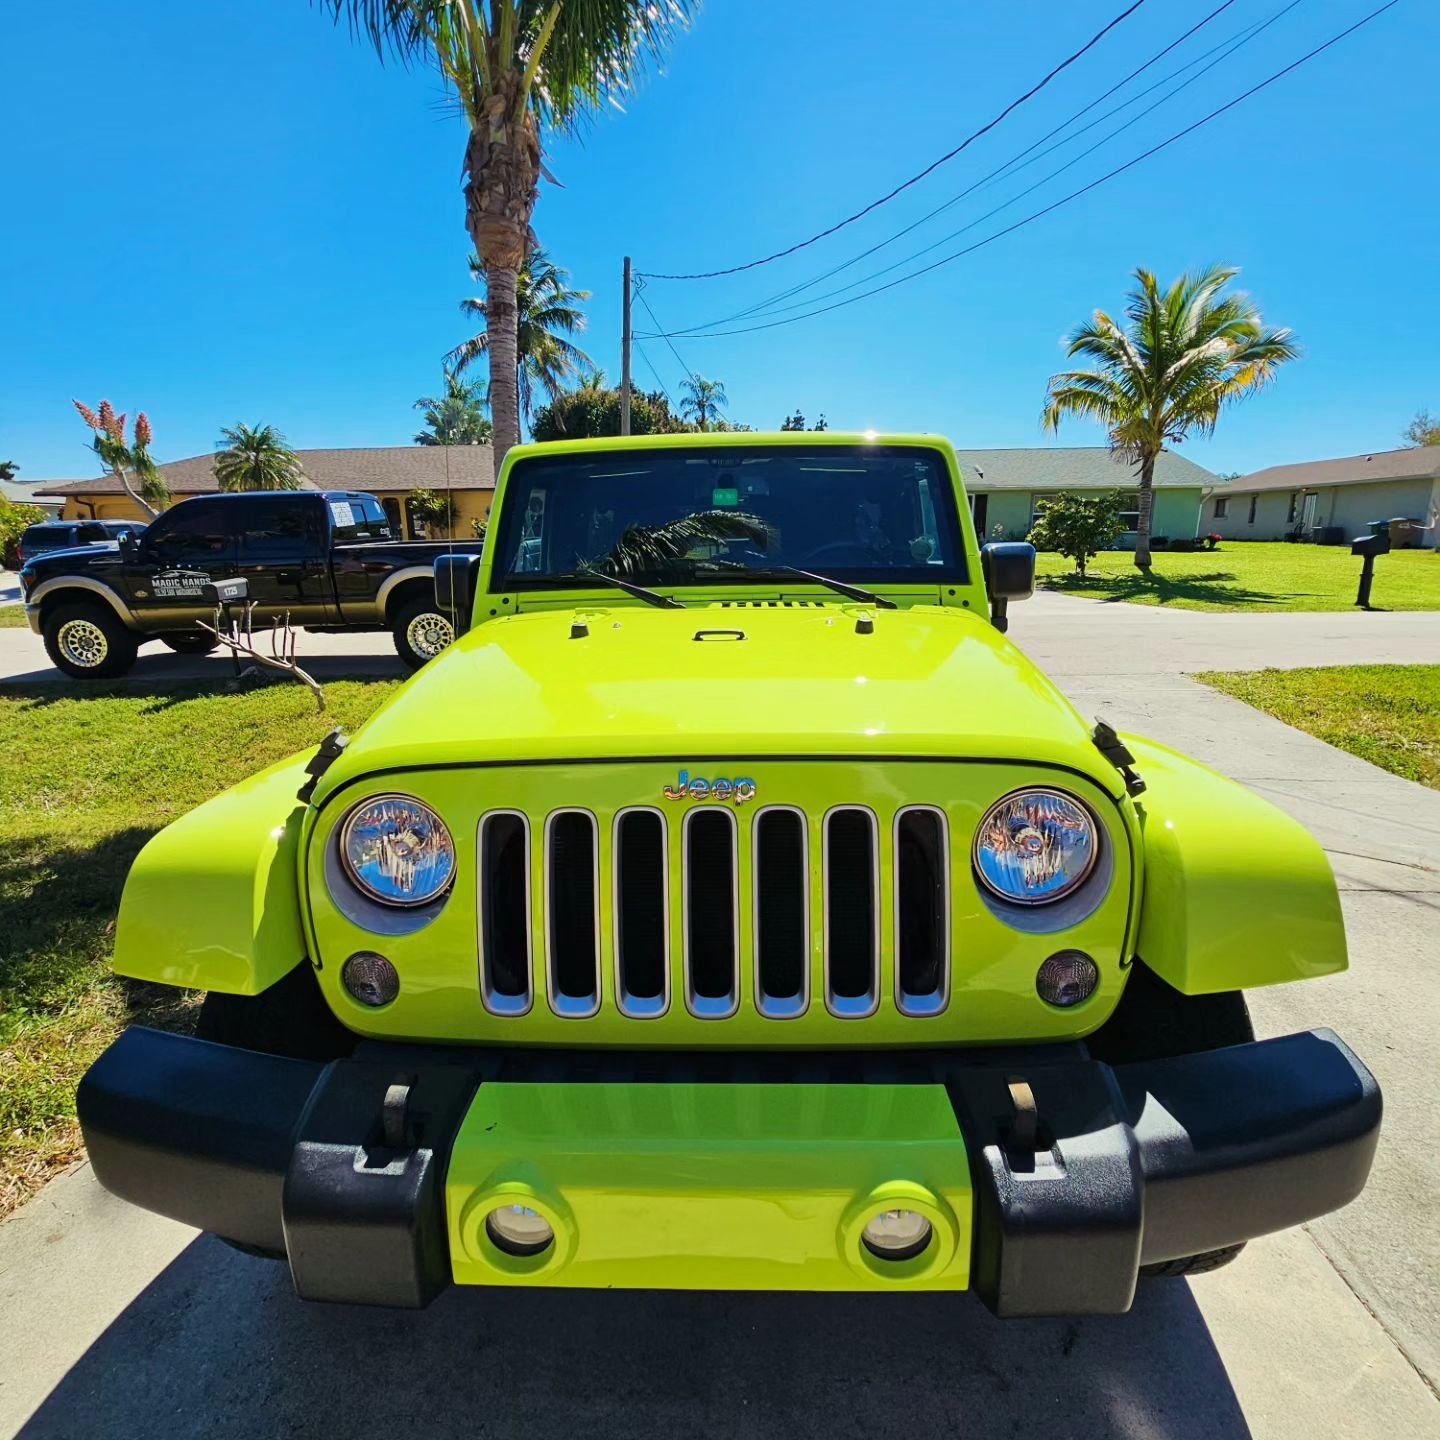 This jeep is ready to go on any adventure after receiving our Standard Detail Package along with trim conditioning to bring back life to the sun faded trim. We can either temporarily dye or ceramic coat trim to enhance the gloss and shine.
-
Book now